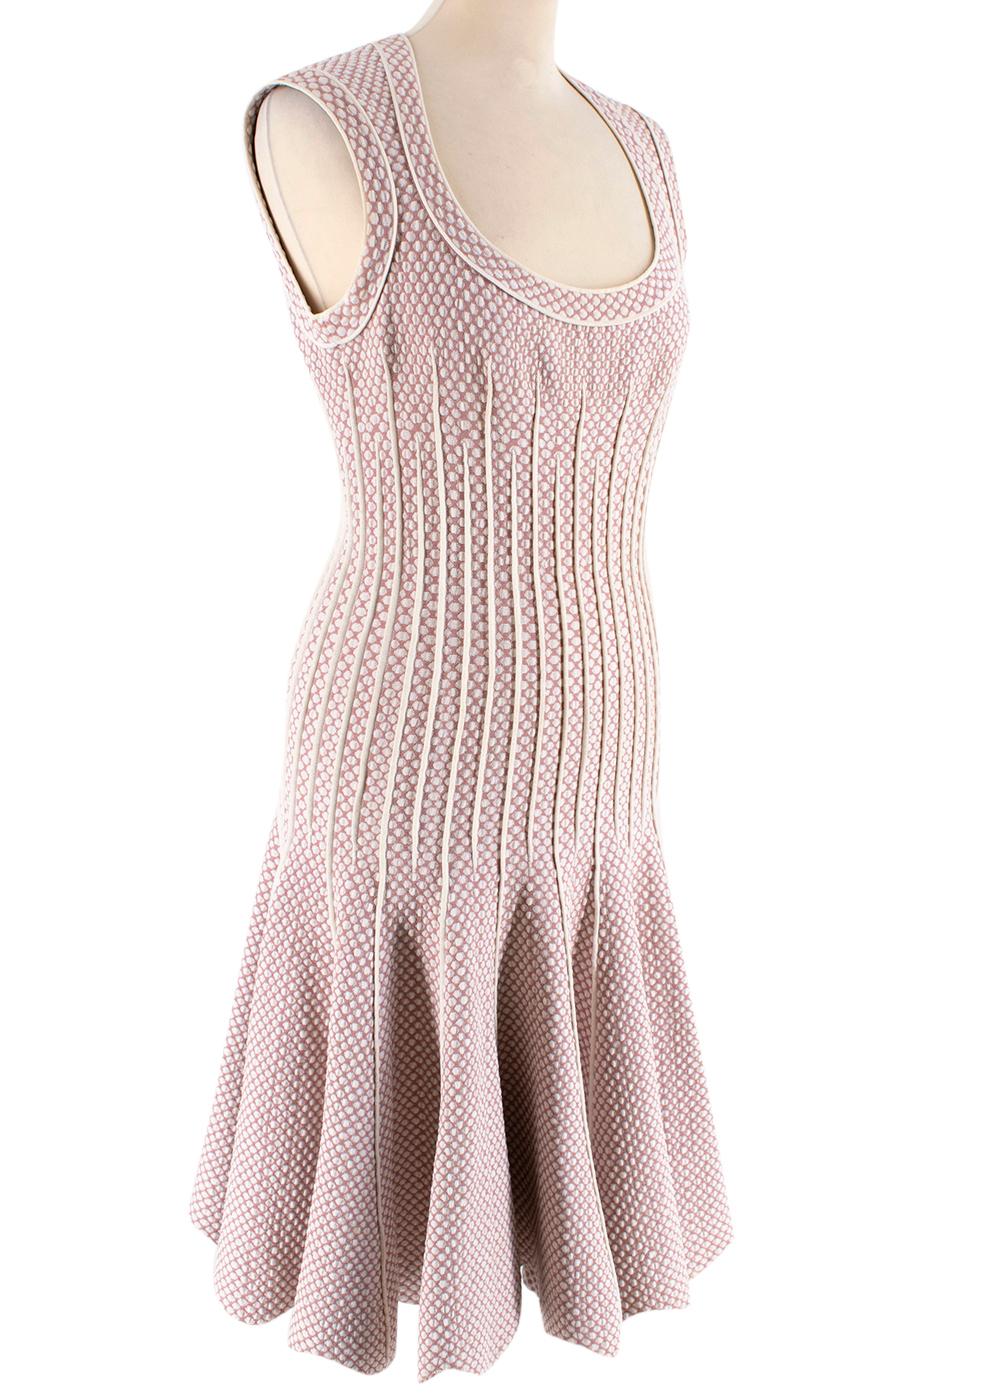 Alaia Pink & White Embroidered Knit Skater Dress

- Dusty rose and white patterned polka dot dress
- Stretchy fabric fitted around the waist
- Wide round low neckline
- Sleeveless 
- White hem patterned on the waist for accentuated illusion 
-